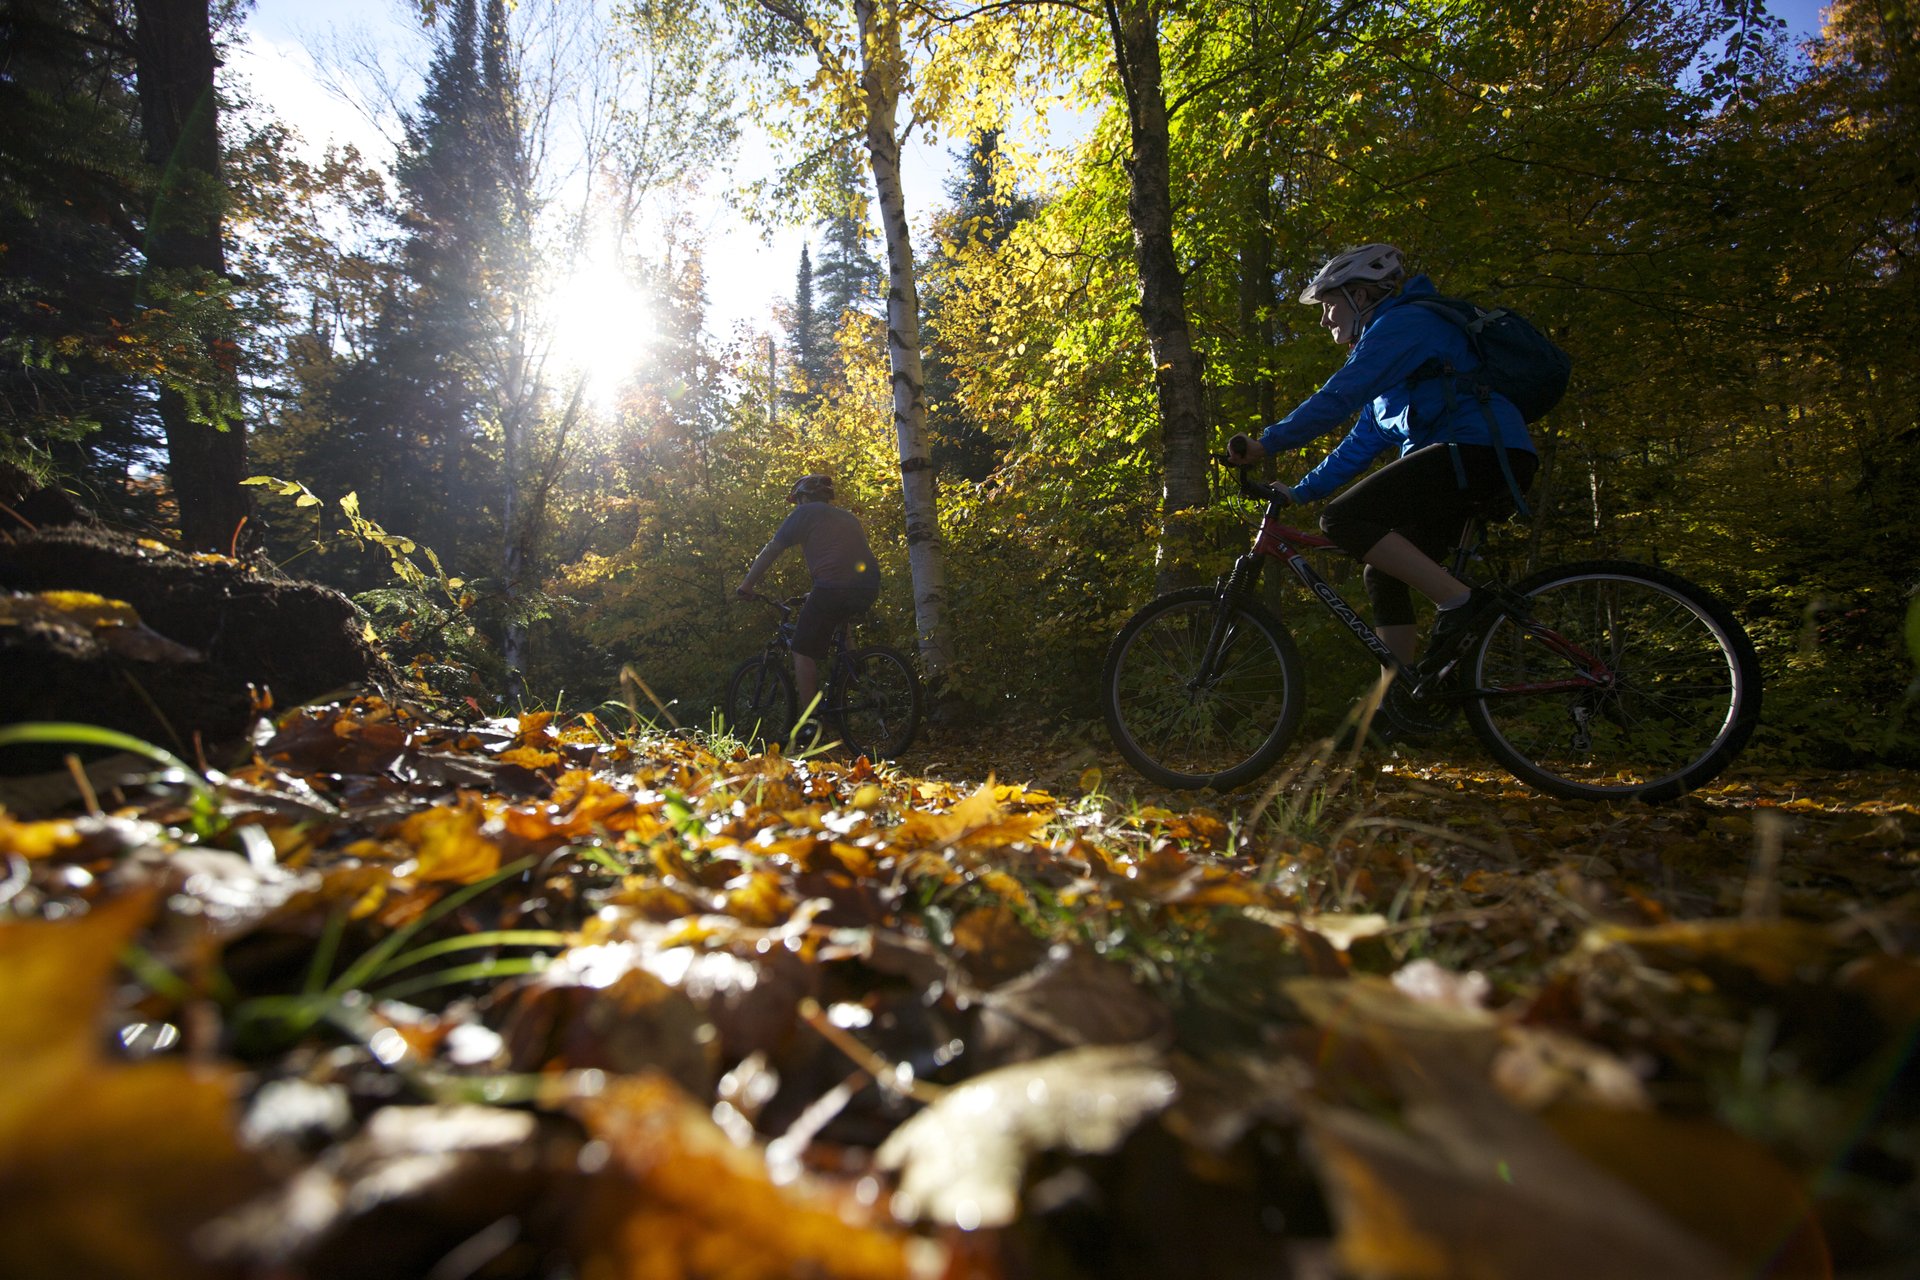 worm's eye view of people cycling through a forest in fall